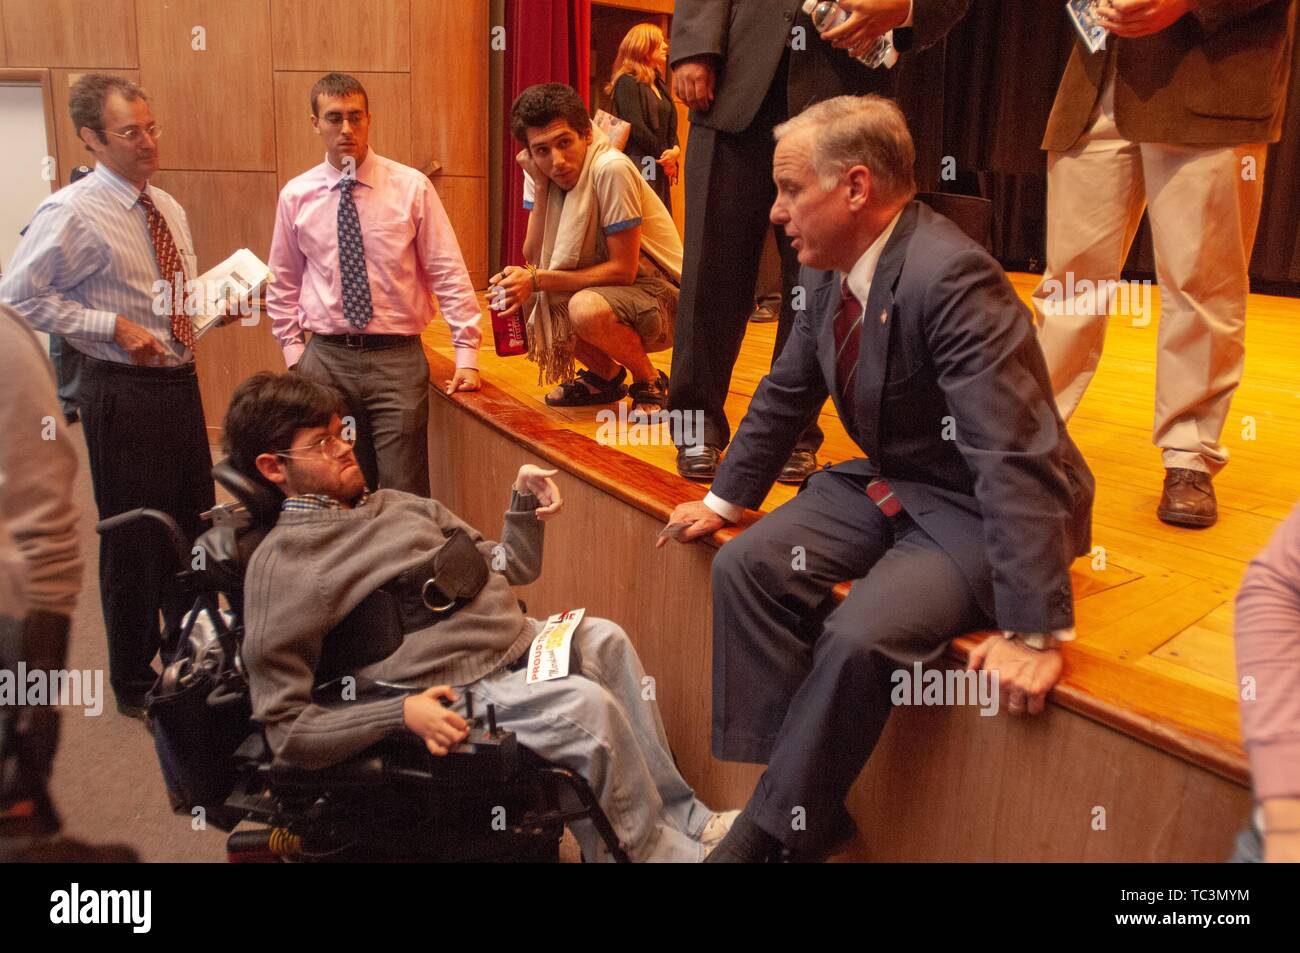 American politician Howard Dean sits casually while speaking with a person in a wheelchair at the Johns Hopkins University, Baltimore, Maryland, October 11, 2007. From the Homewood Photography collection. () Stock Photo